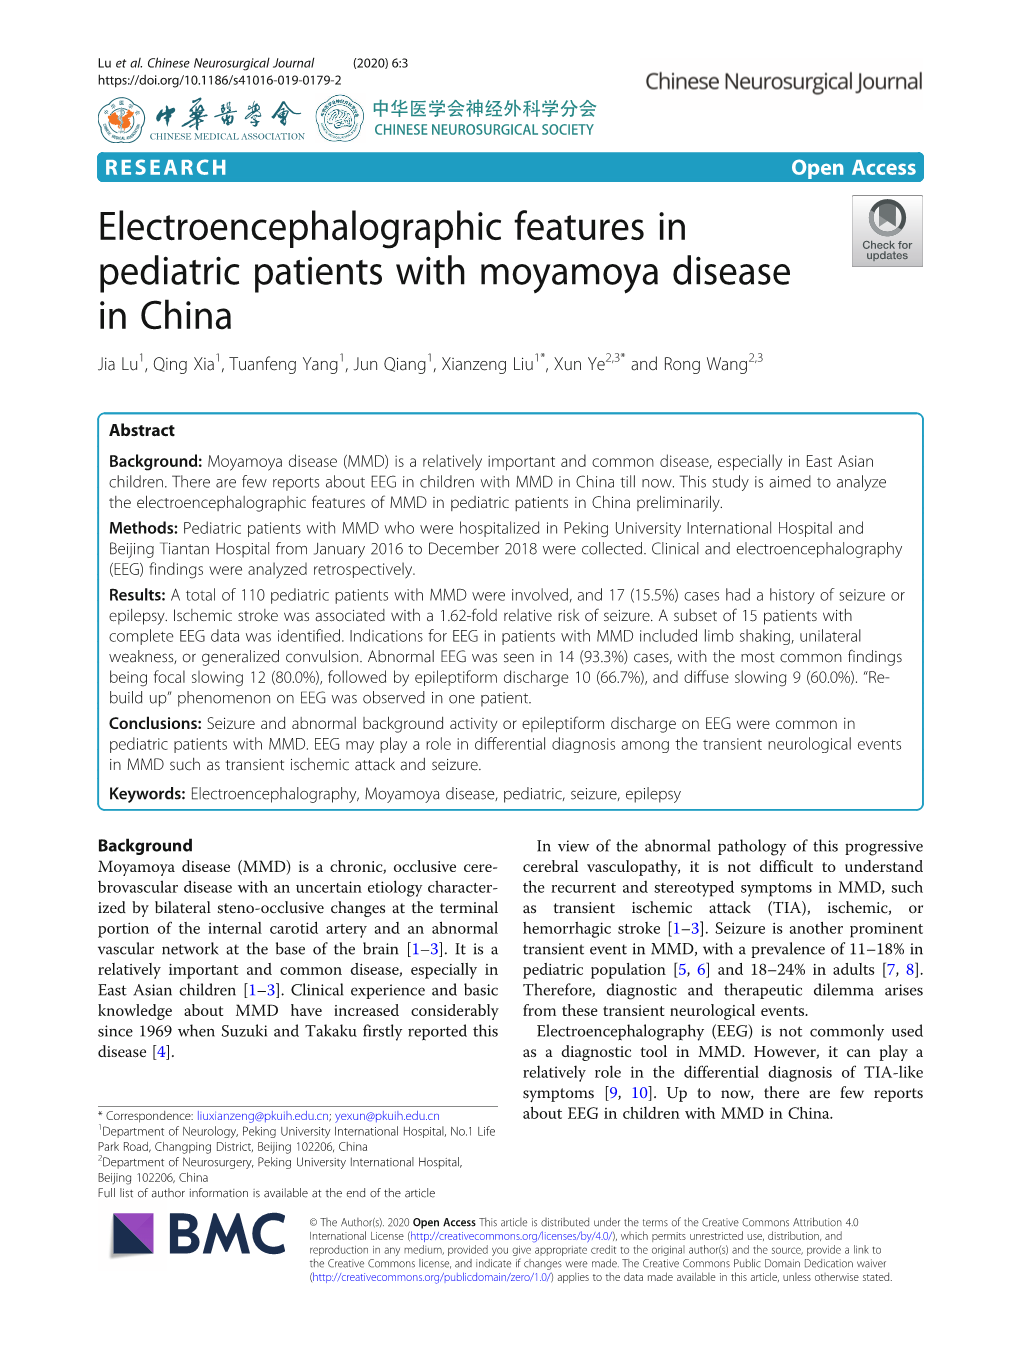 Electroencephalographic Features in Pediatric Patients with Moyamoya